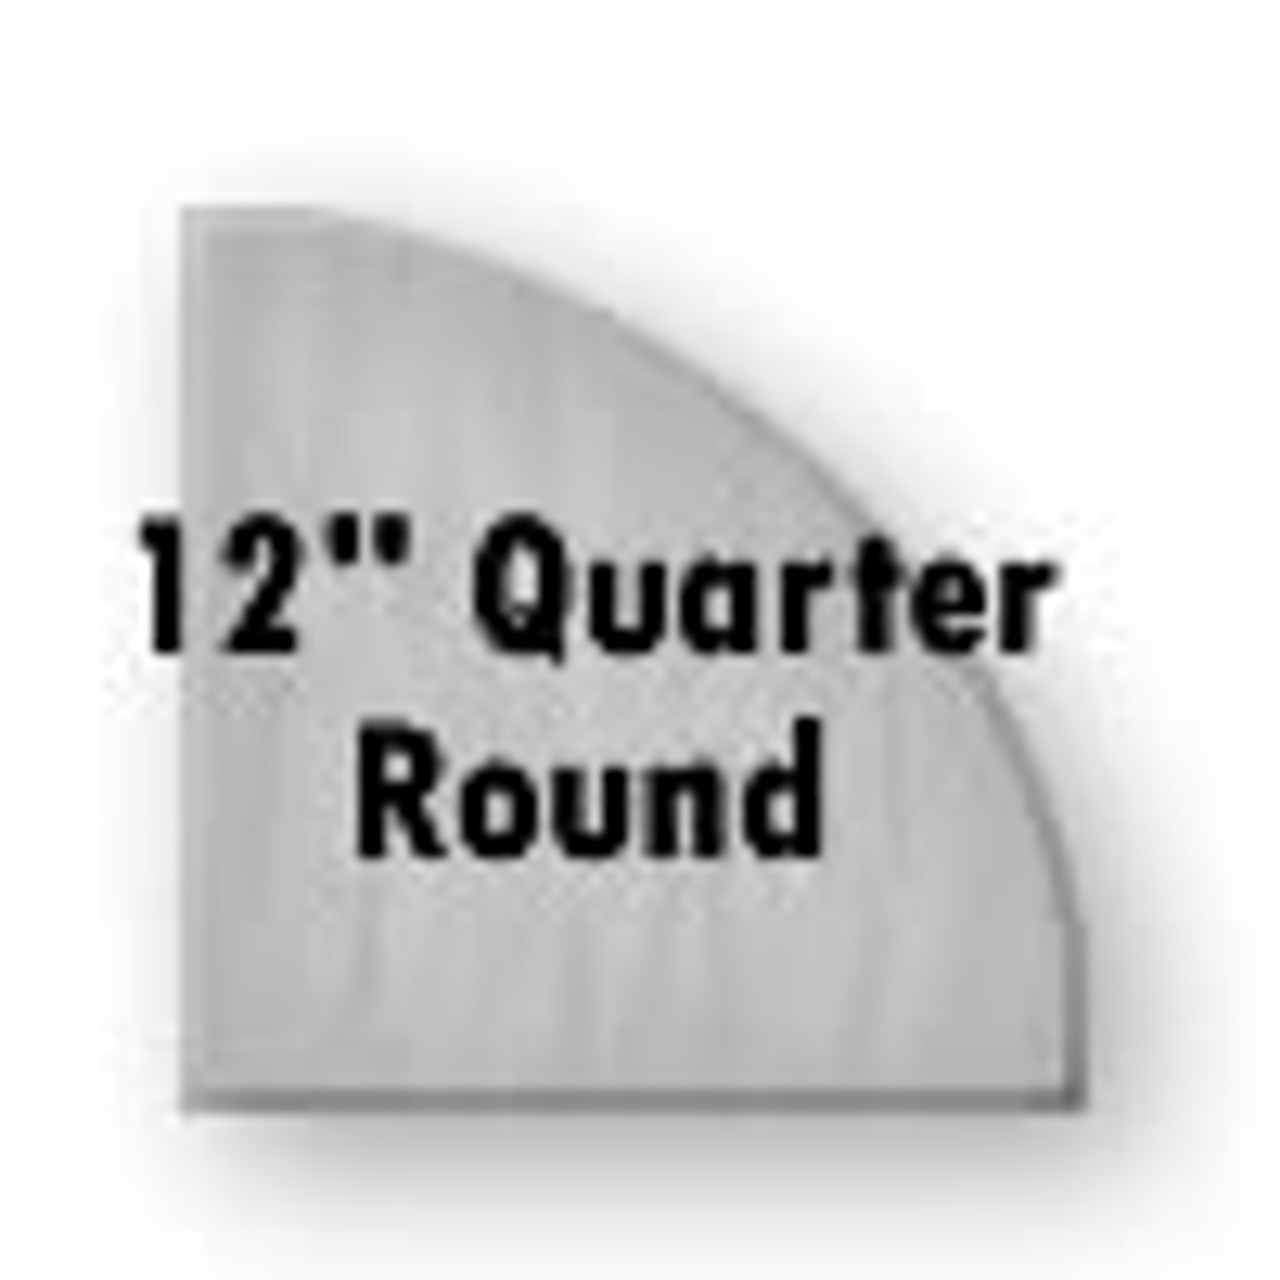 Clear Tempered Glass - 12" Quarter Round